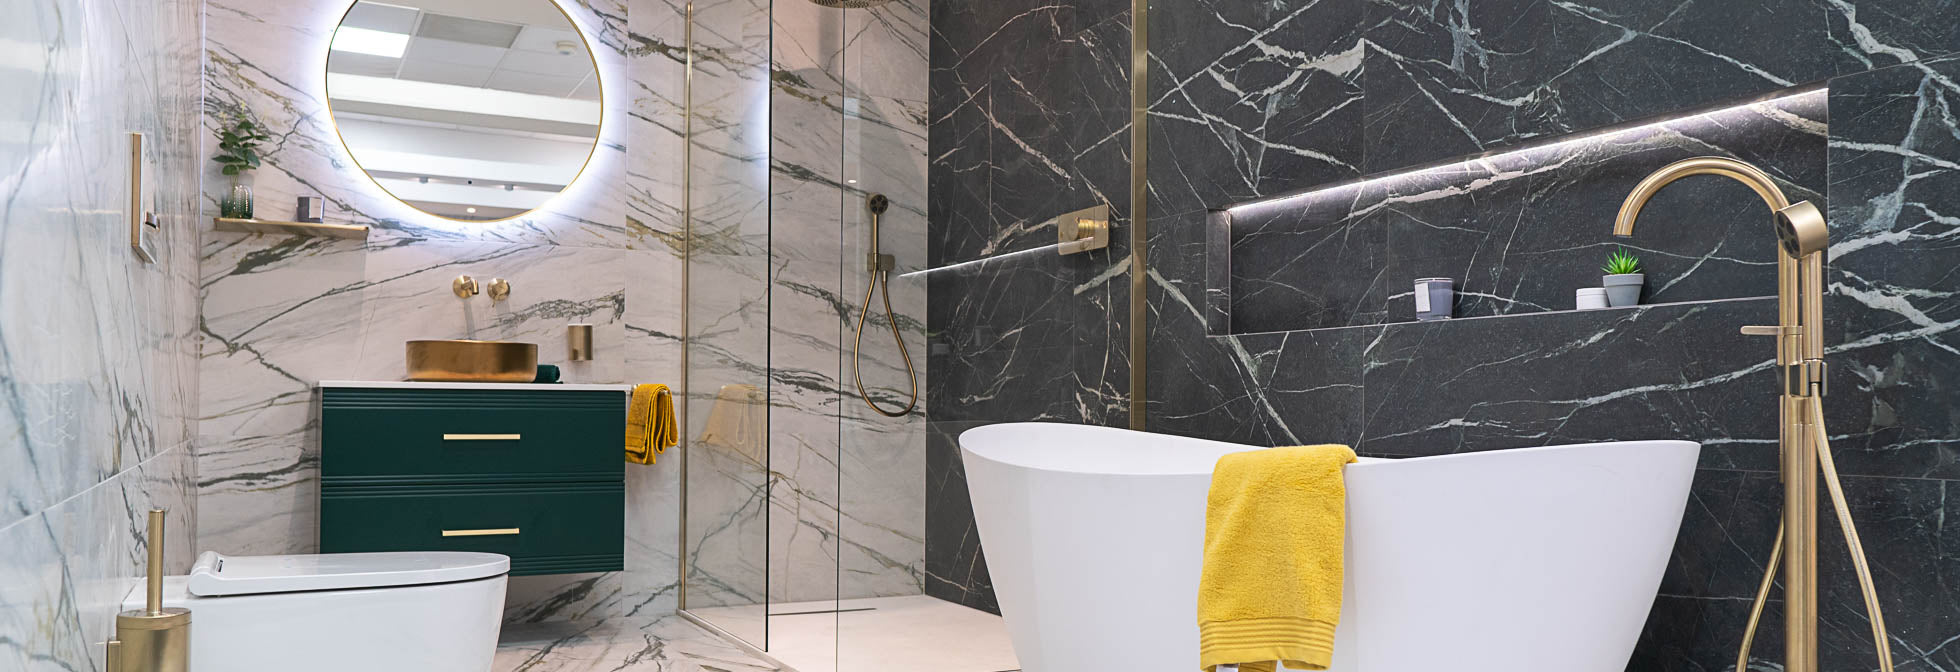 Creating a Luxurious Retreat: Fluted Glass & Clear Shower Screens for a Hotel-Spa Bathroom Experience